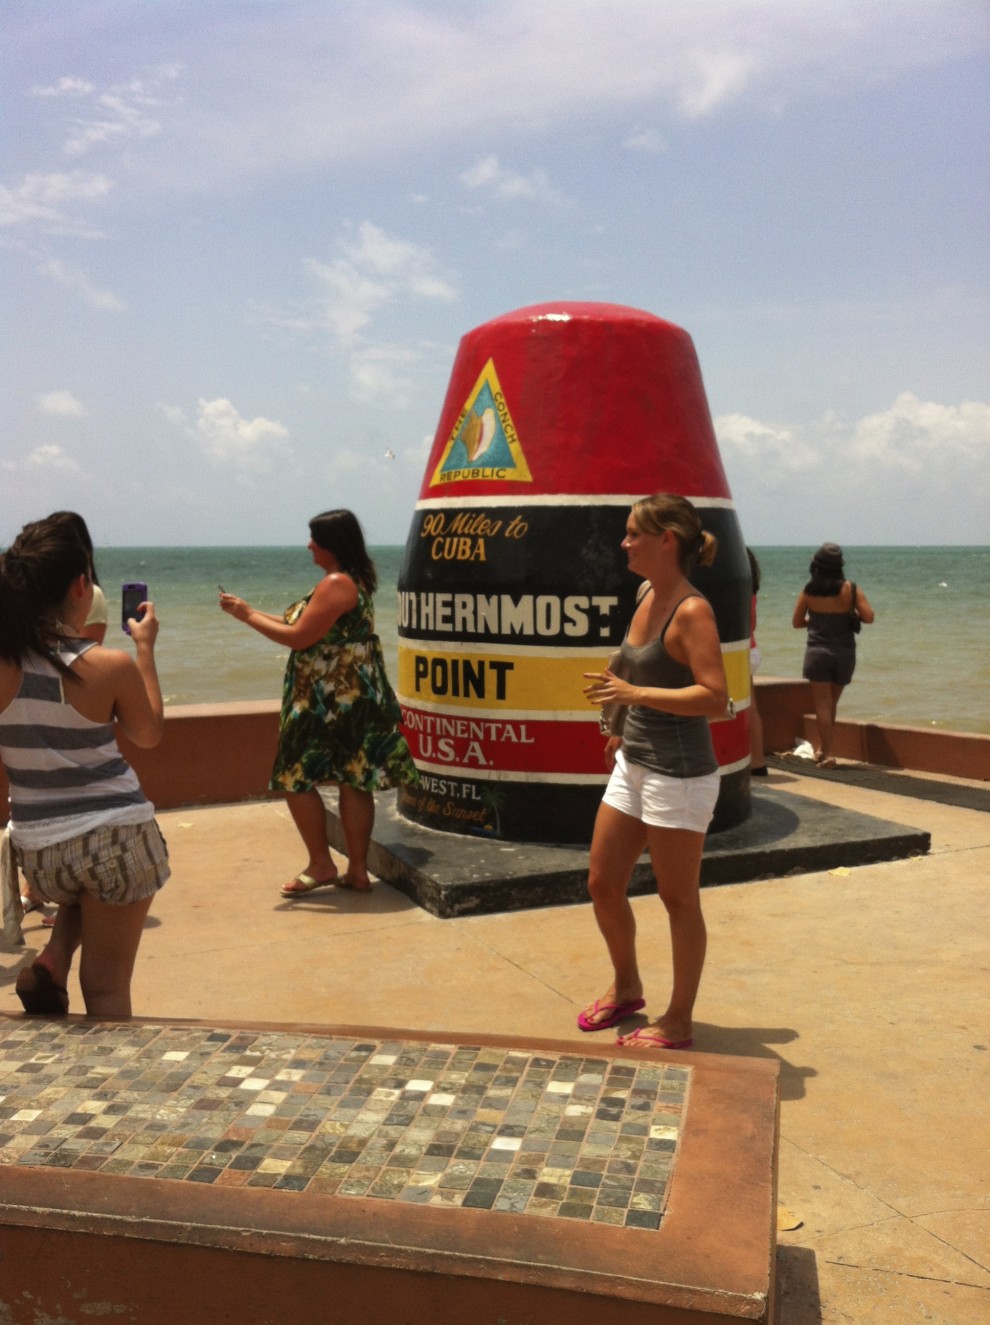 The Southern Most Point